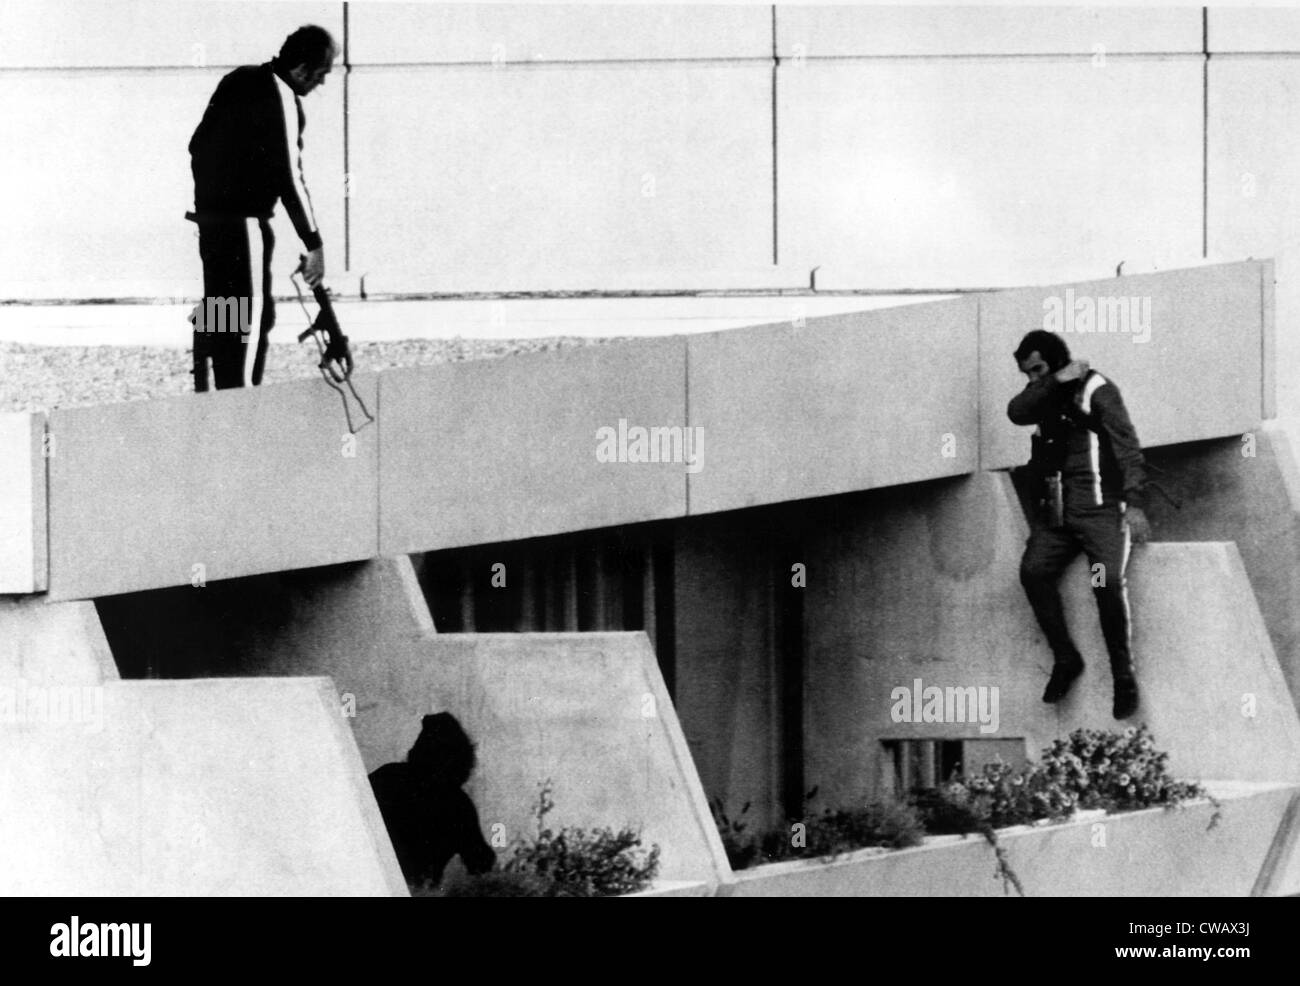 1972 Olympics, Armed Police drop into position on terrace above apartments where hostages are being held. Olympic Village, Stock Photo